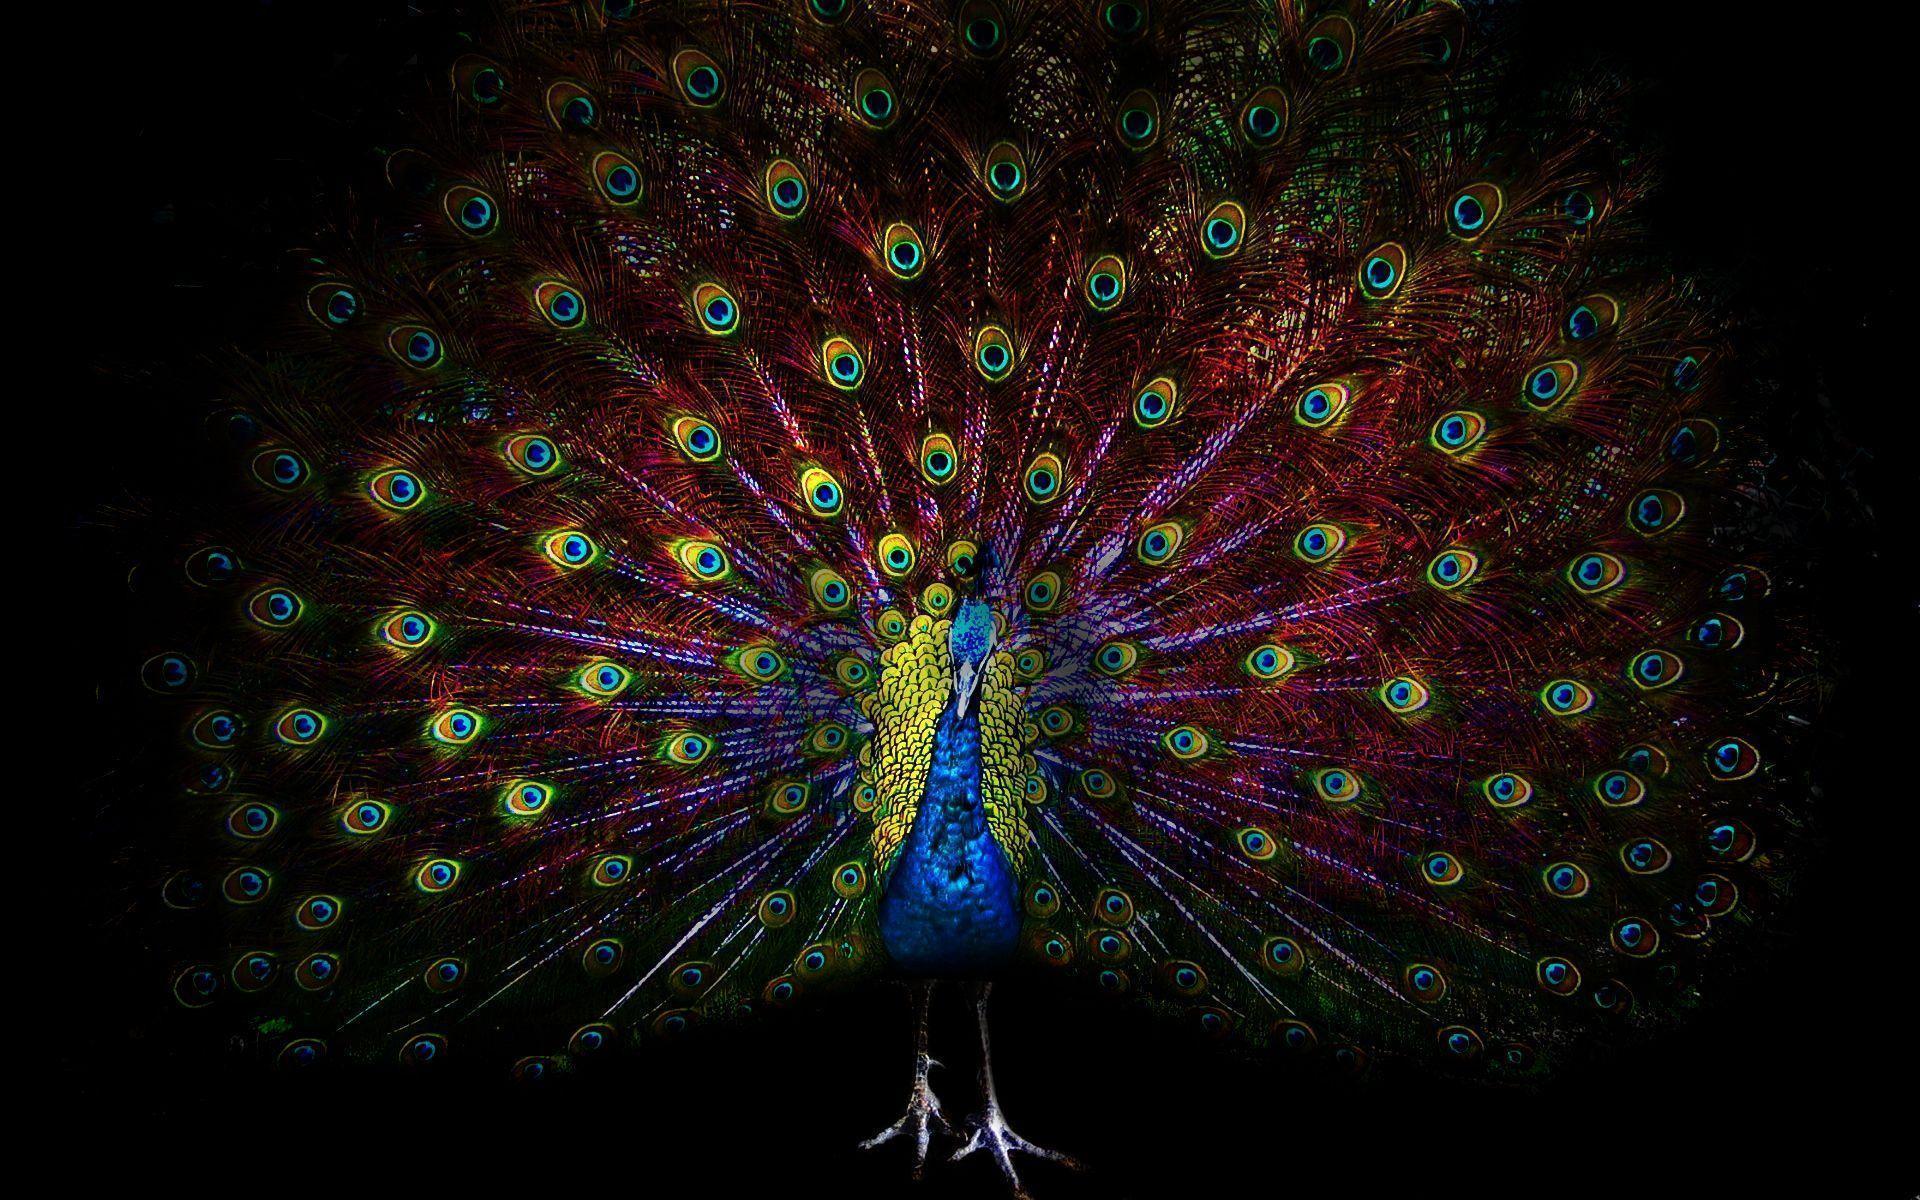 Hd Wallpapers Of Peacock Feathers